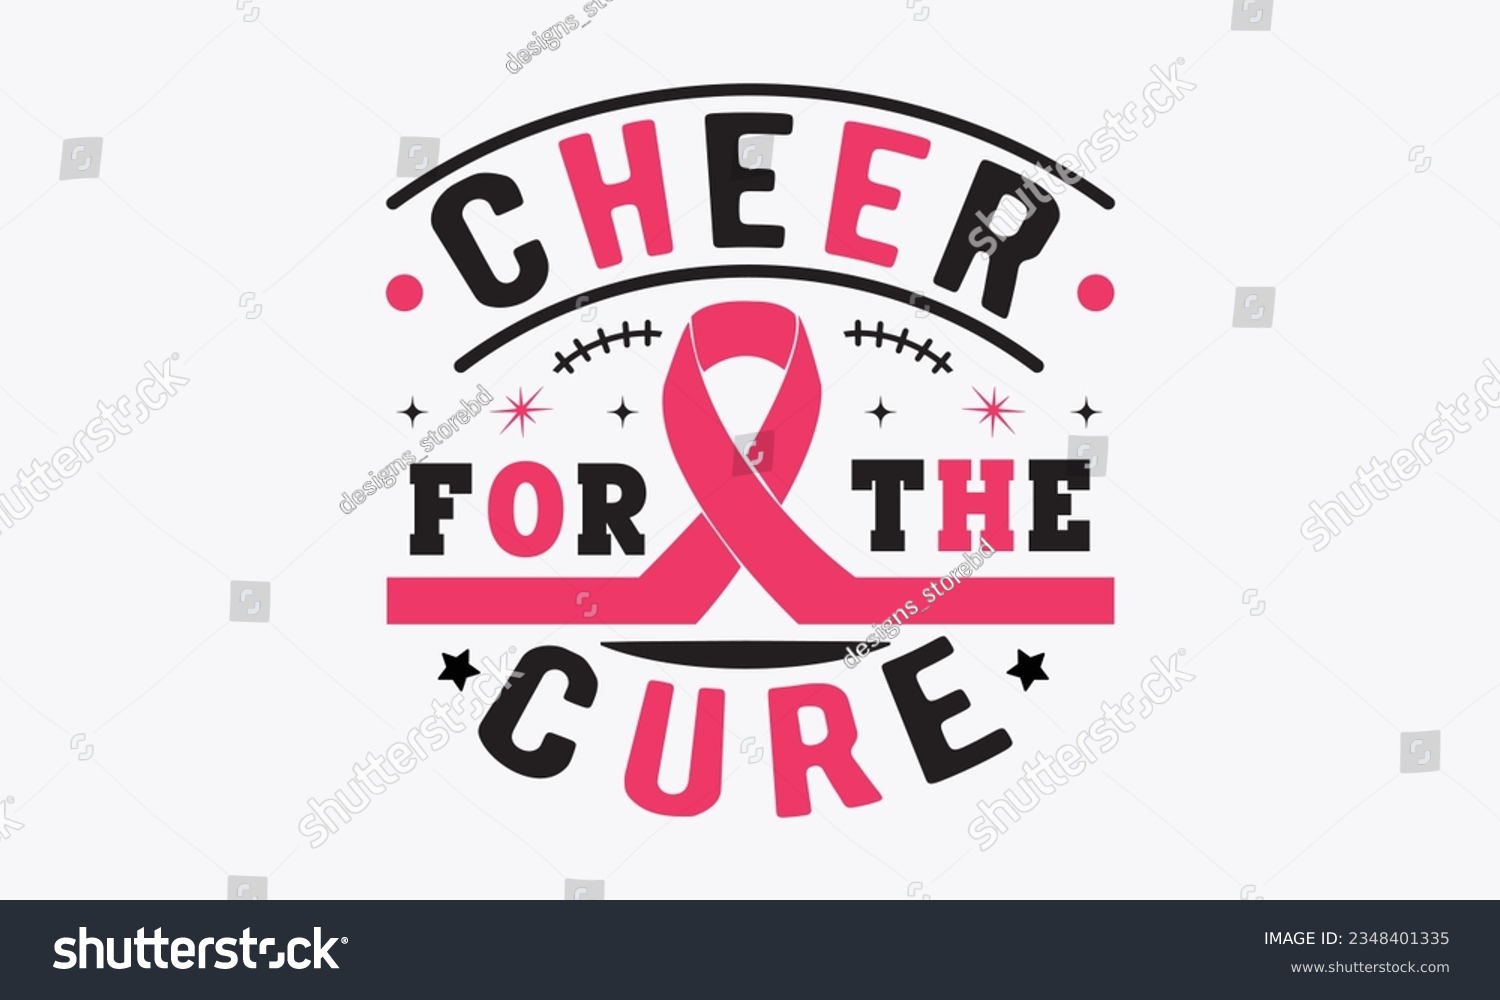 SVG of Cheer for the cure svg, Breast Cancer SVG design, Cancer Awareness, Instant Download, Breast Cancer Ribbon svg, cut files, Cricut, Silhouette, Breast Cancer t shirt design Quote bundle svg